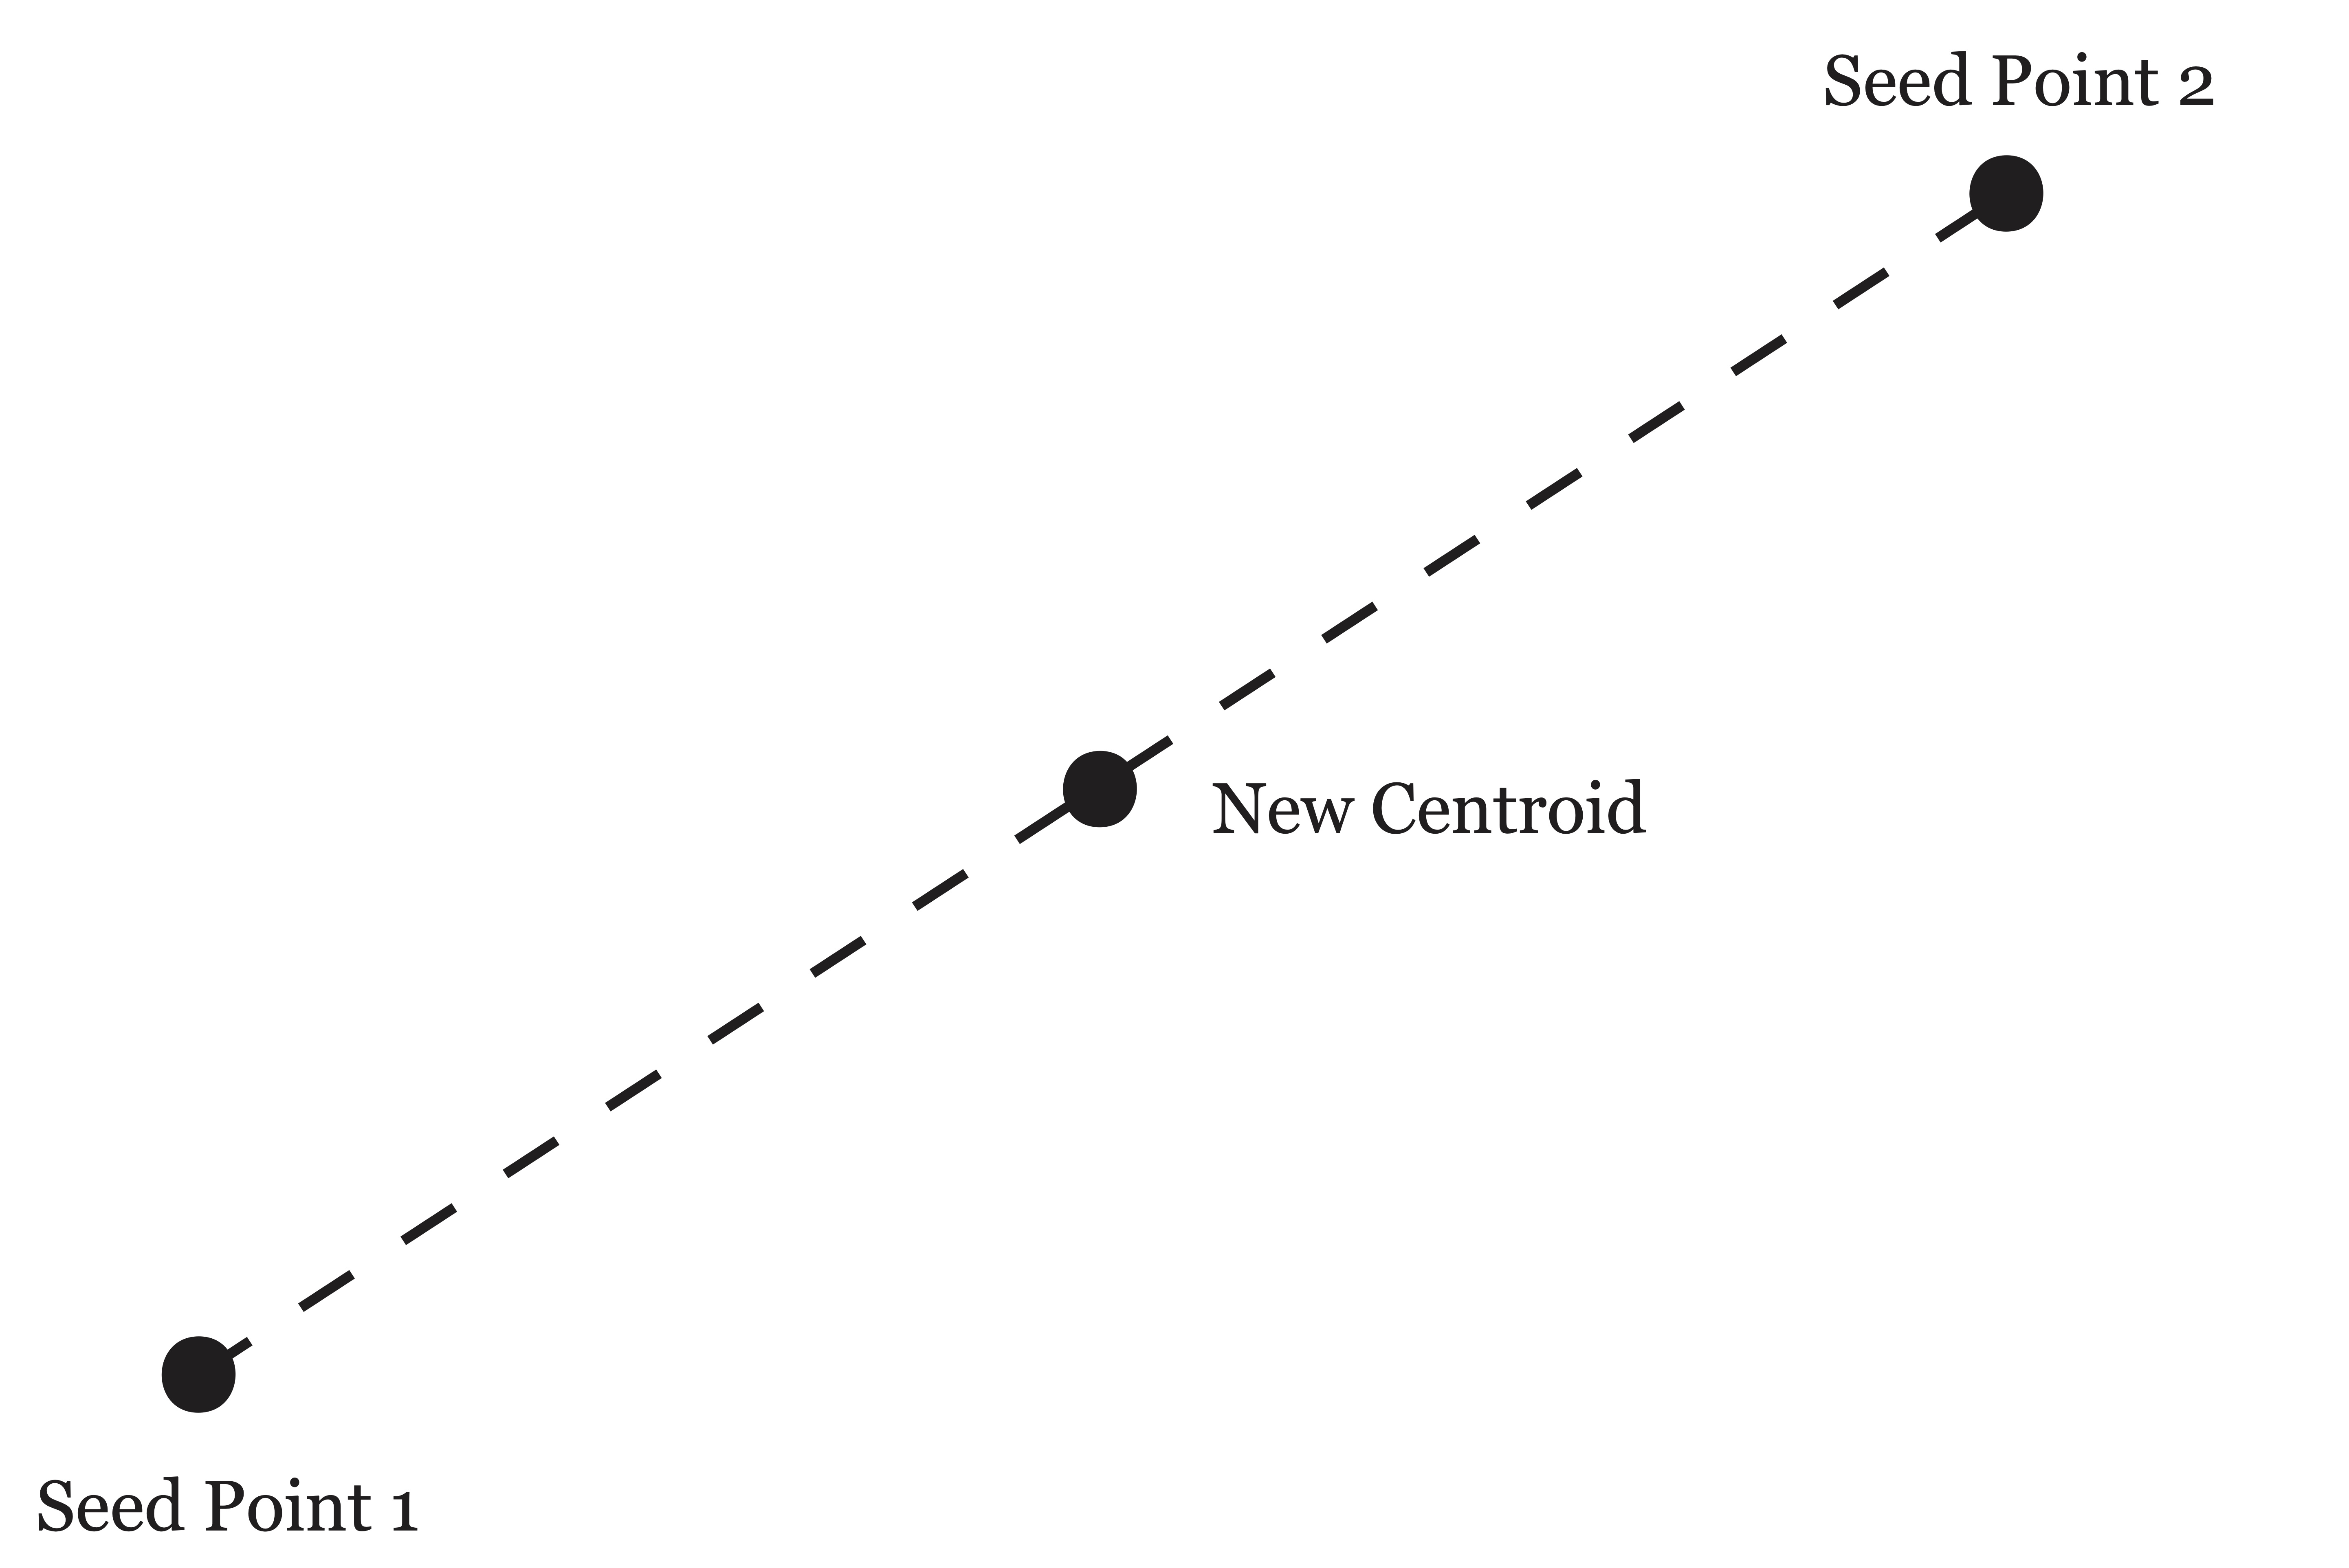 Jancey's method of reflecting old seed point across the centroid to determine new seed point